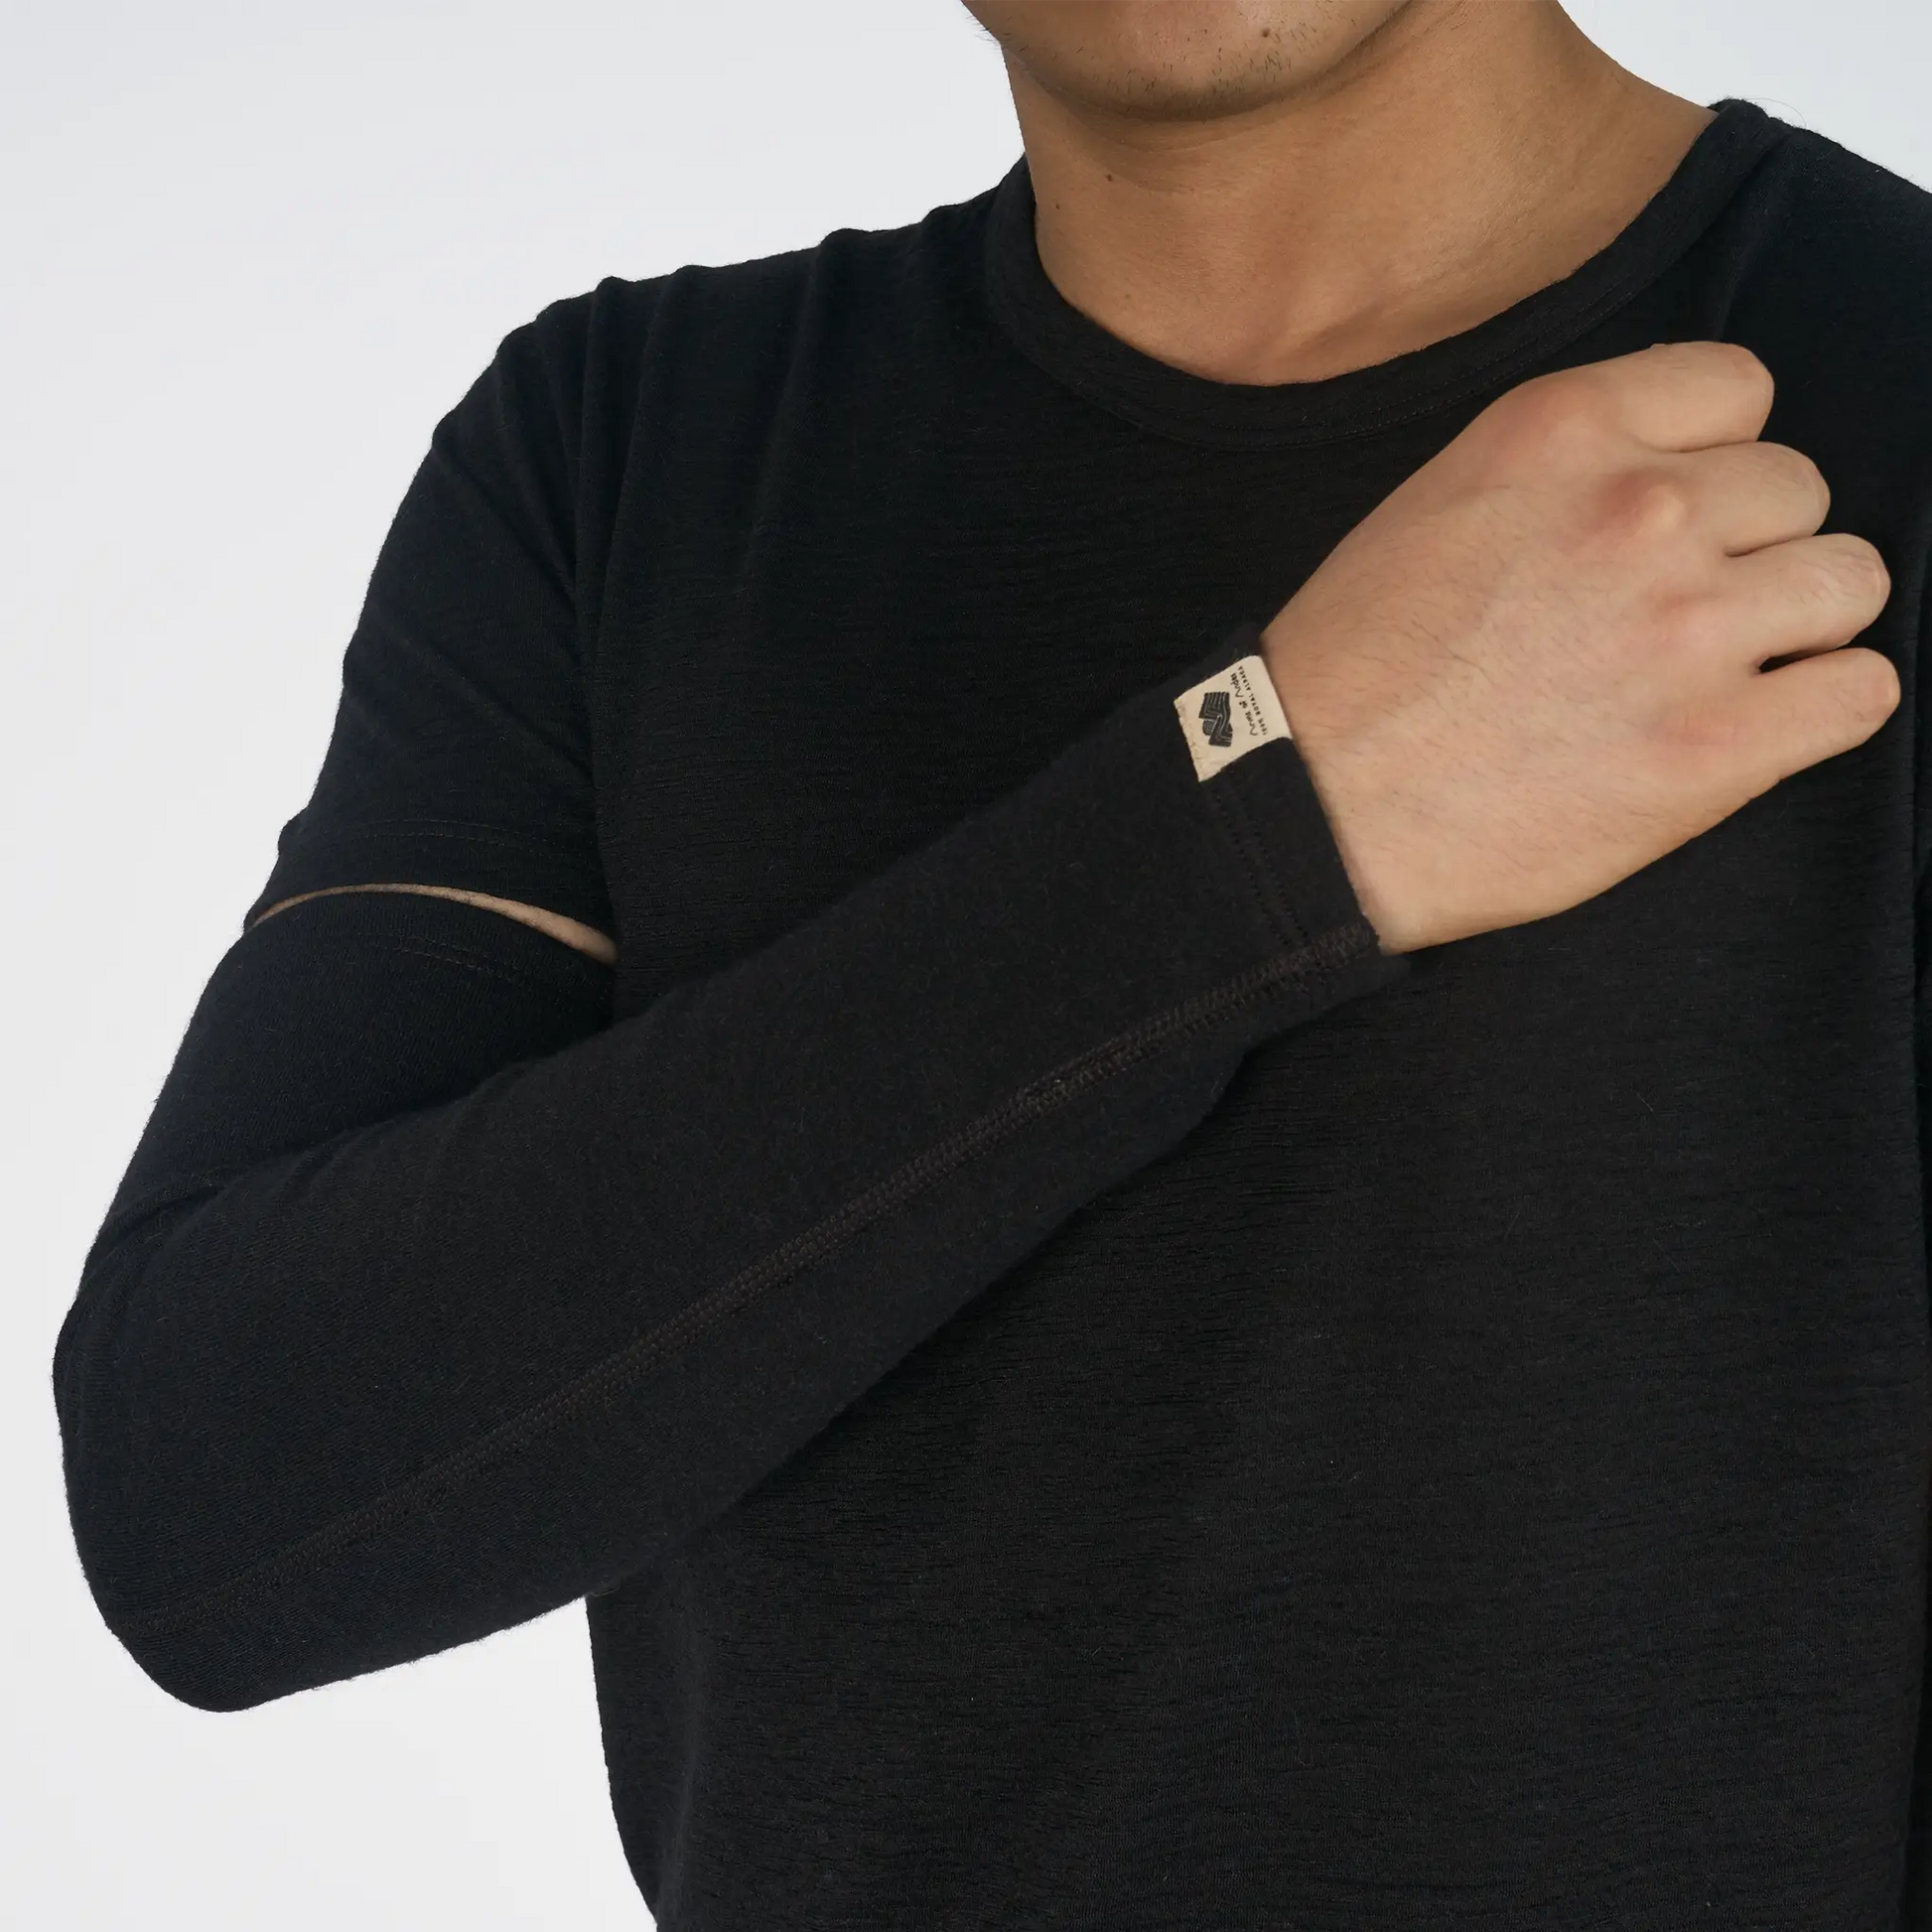 mens warmest sleeve midweight color black